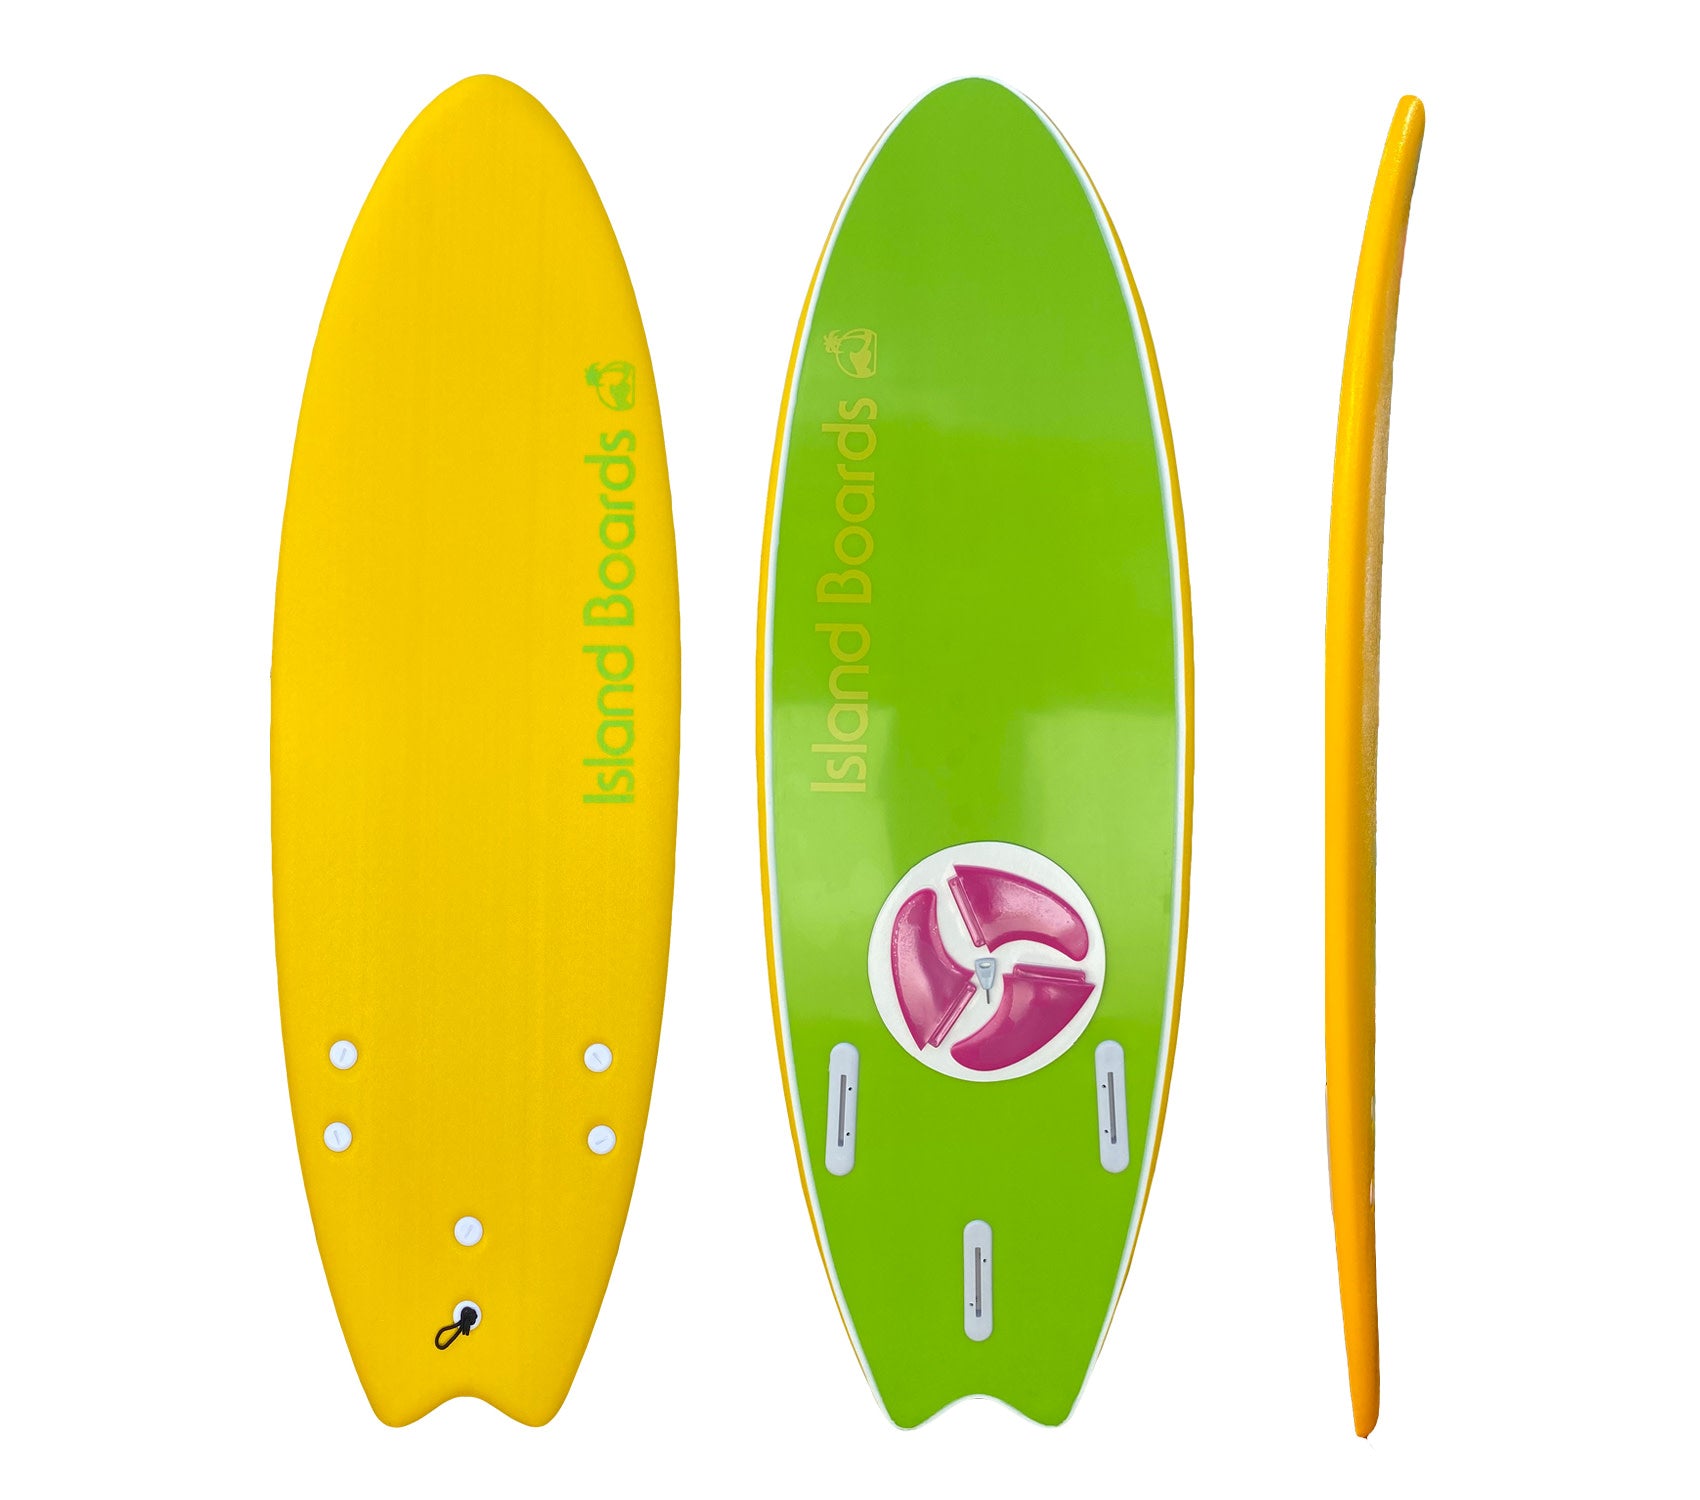 Island Water Sports Swallow Tail Softtop Surfboard Yellow 5ft6in